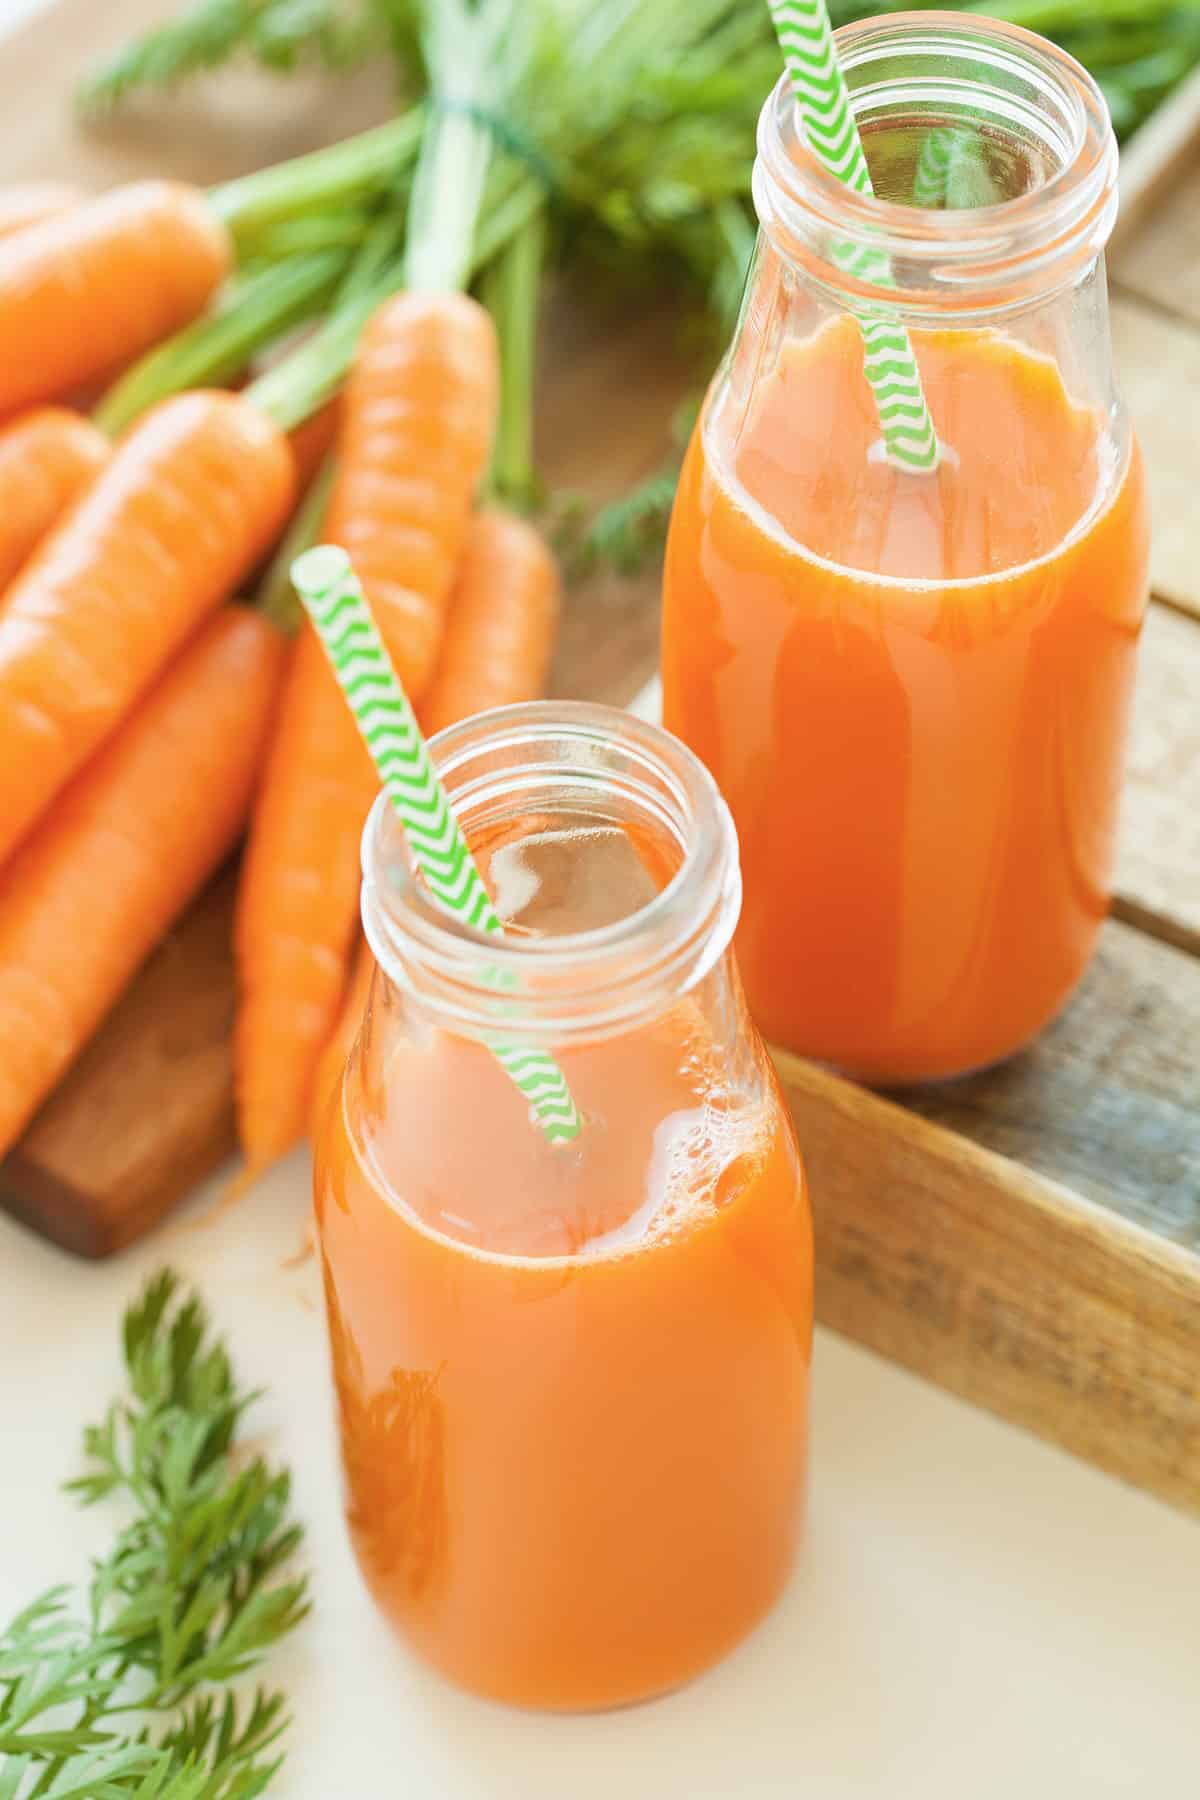 Carrot juice in a glass bottle with a green striped straw and fresh carrots in the background